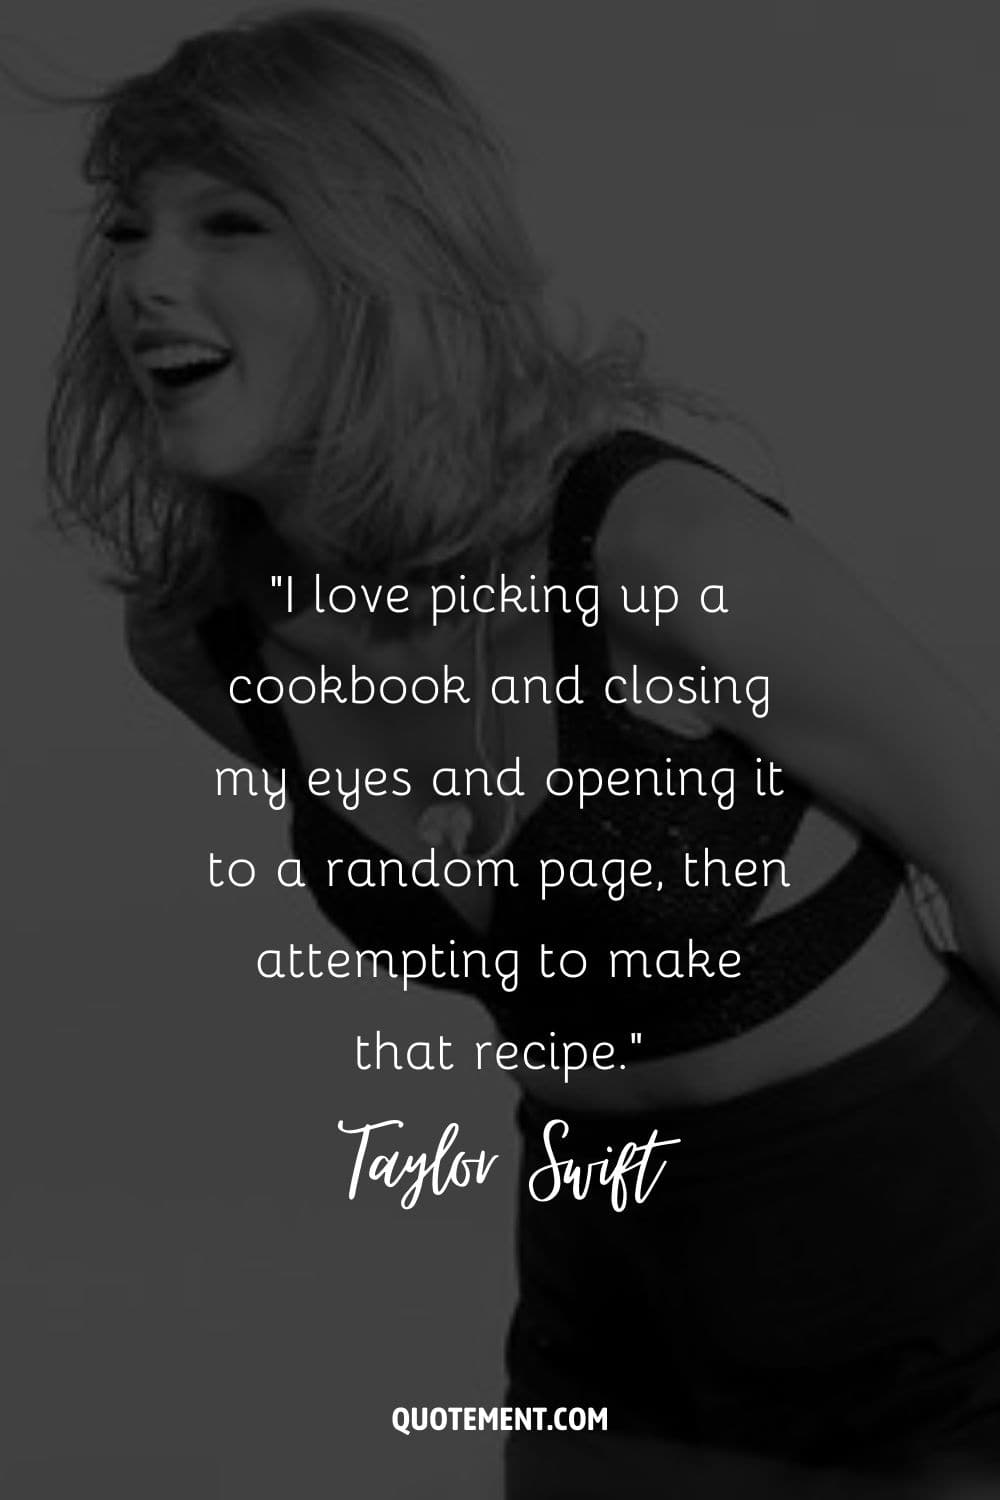 “I love picking up a cookbook and closing my eyes and opening it to a random page, then attempting to make that recipe.” ― Taylor Swift